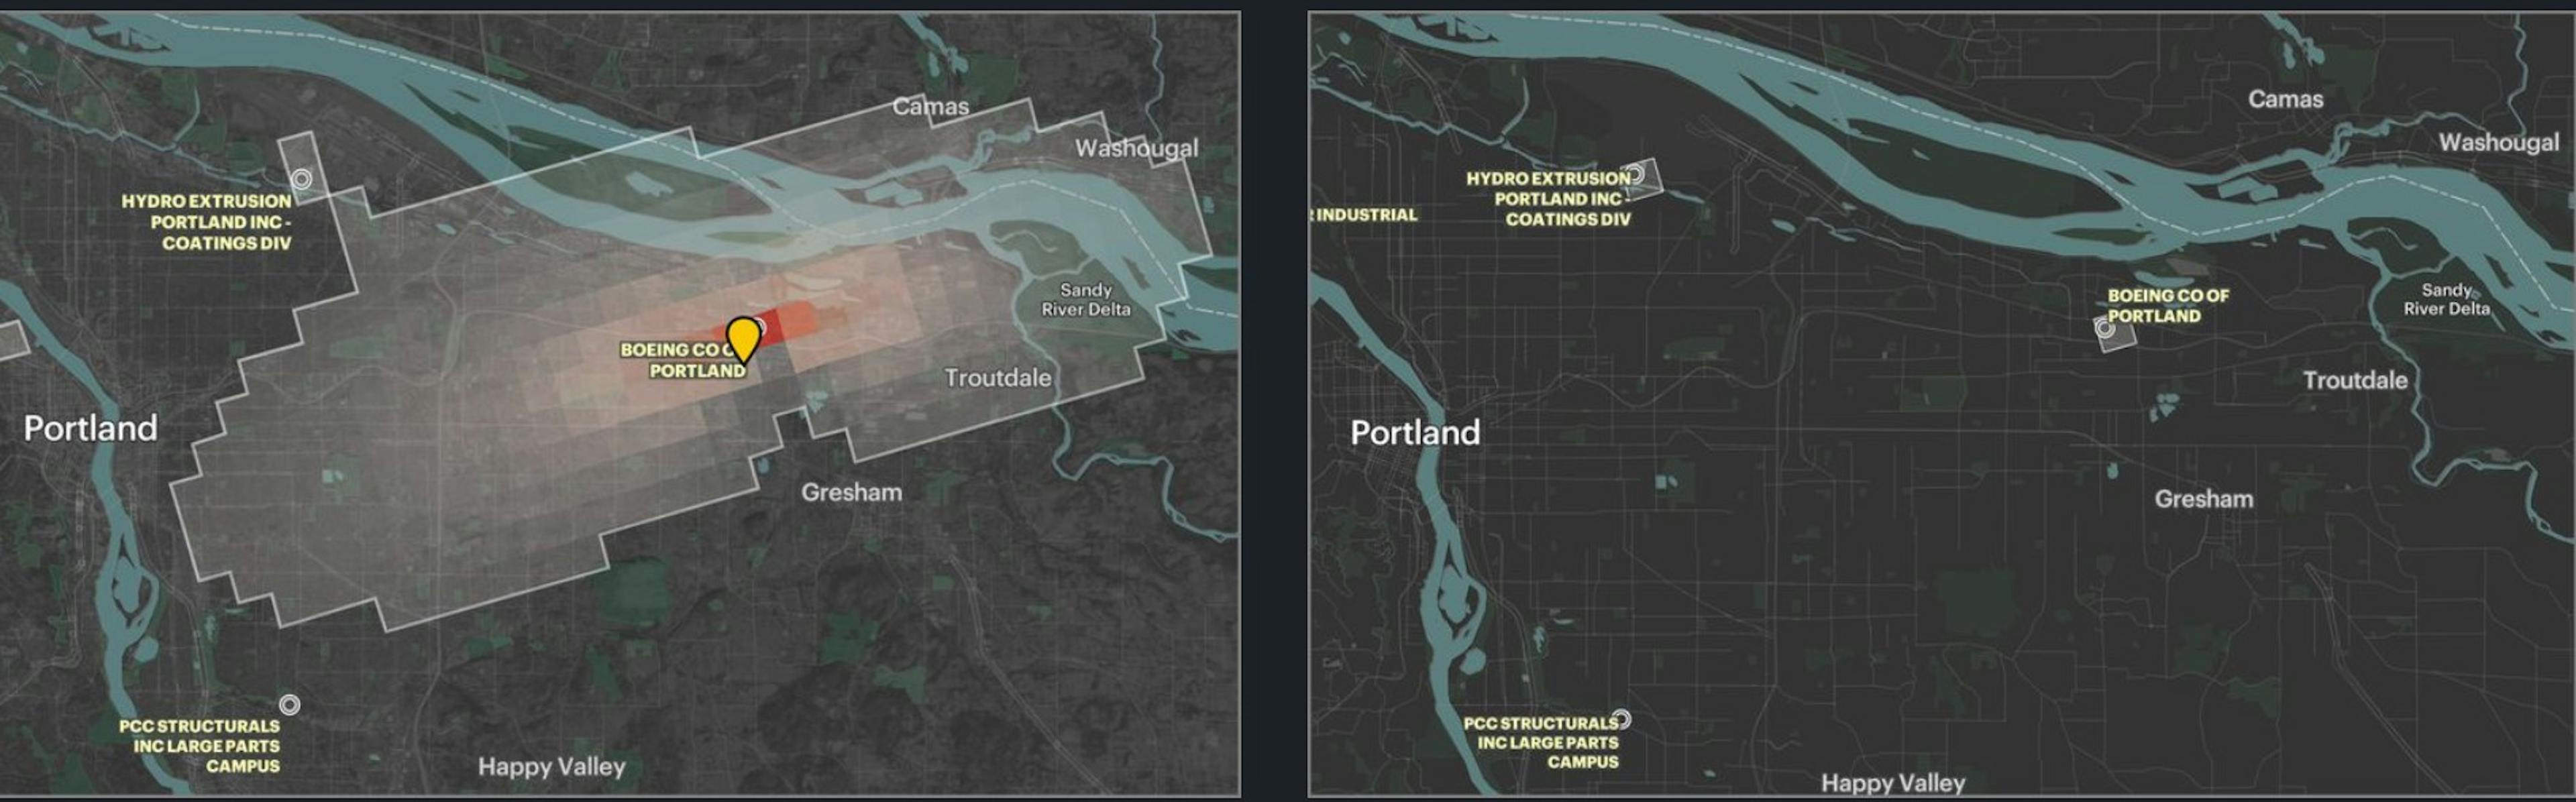 The image on the left shows the air pollution footprint from the Boeing Portland facility in ProPublica’s initial, unpublished analysis of industrial air pollution. The image on the right shows the analysis we published, after our fact check led Boeing to correct its data. Credit: Screenshots by ProPublica